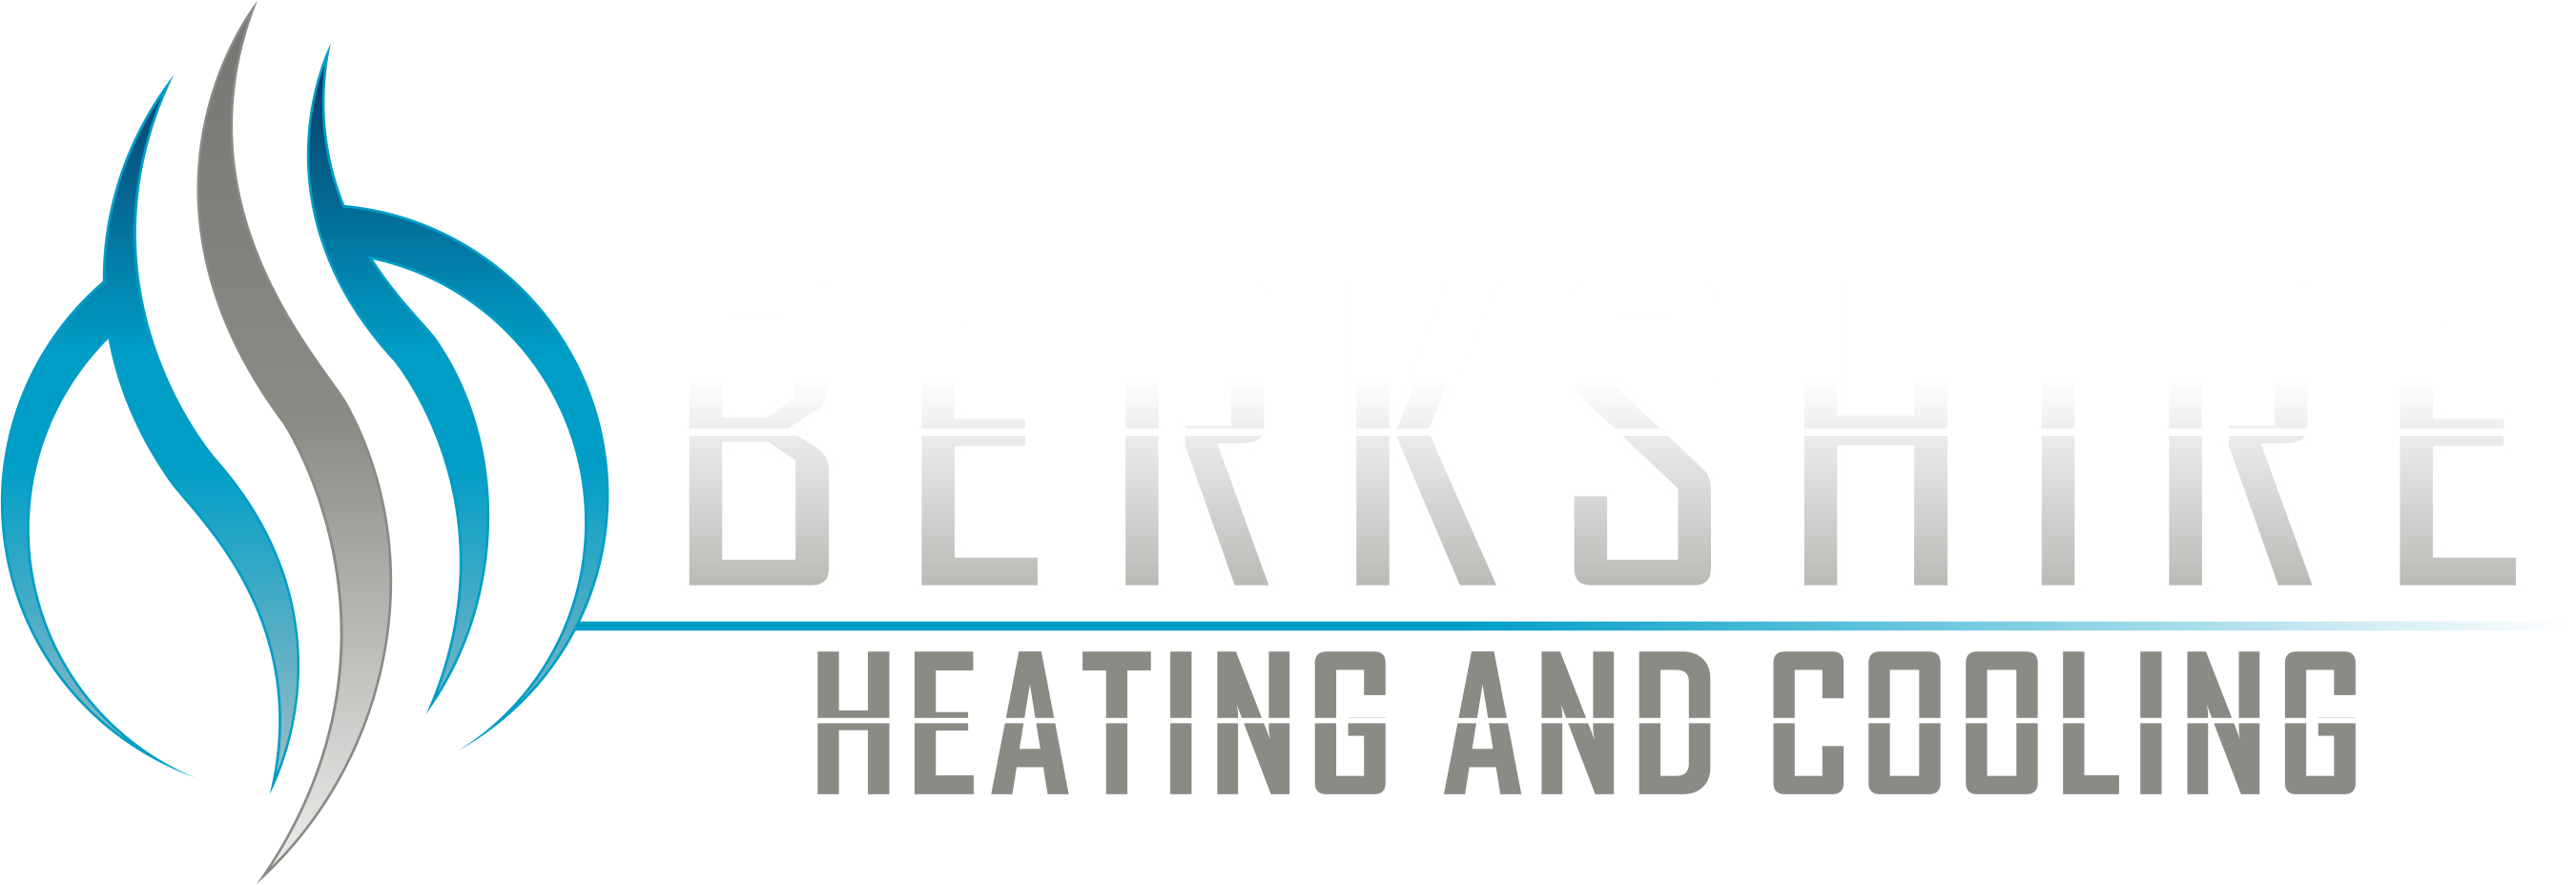 Bershire Heating and Cooling Logo